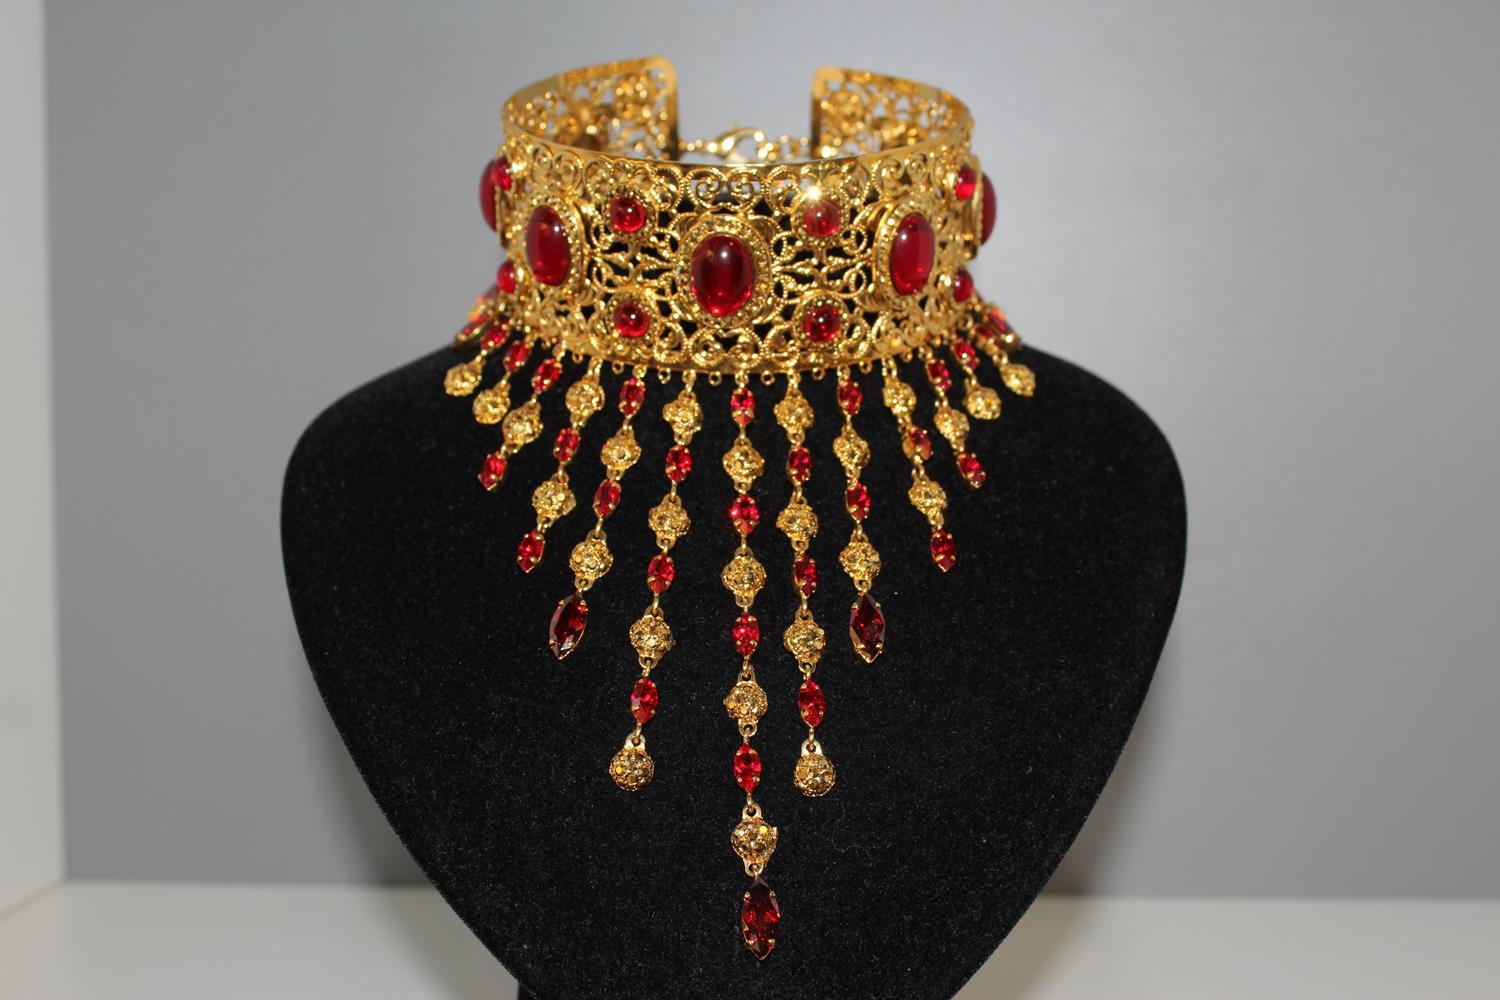 Fantastic masterpiece by Carlo Zini
One of the world greatest bijoux designers
Non allergenic brass
18 KT Gold dipped 3 micron
Amazing hand creation of Ruby like drops and Swarovski crystals 
100% Artisanal work
Made in Milano
Worldwide express